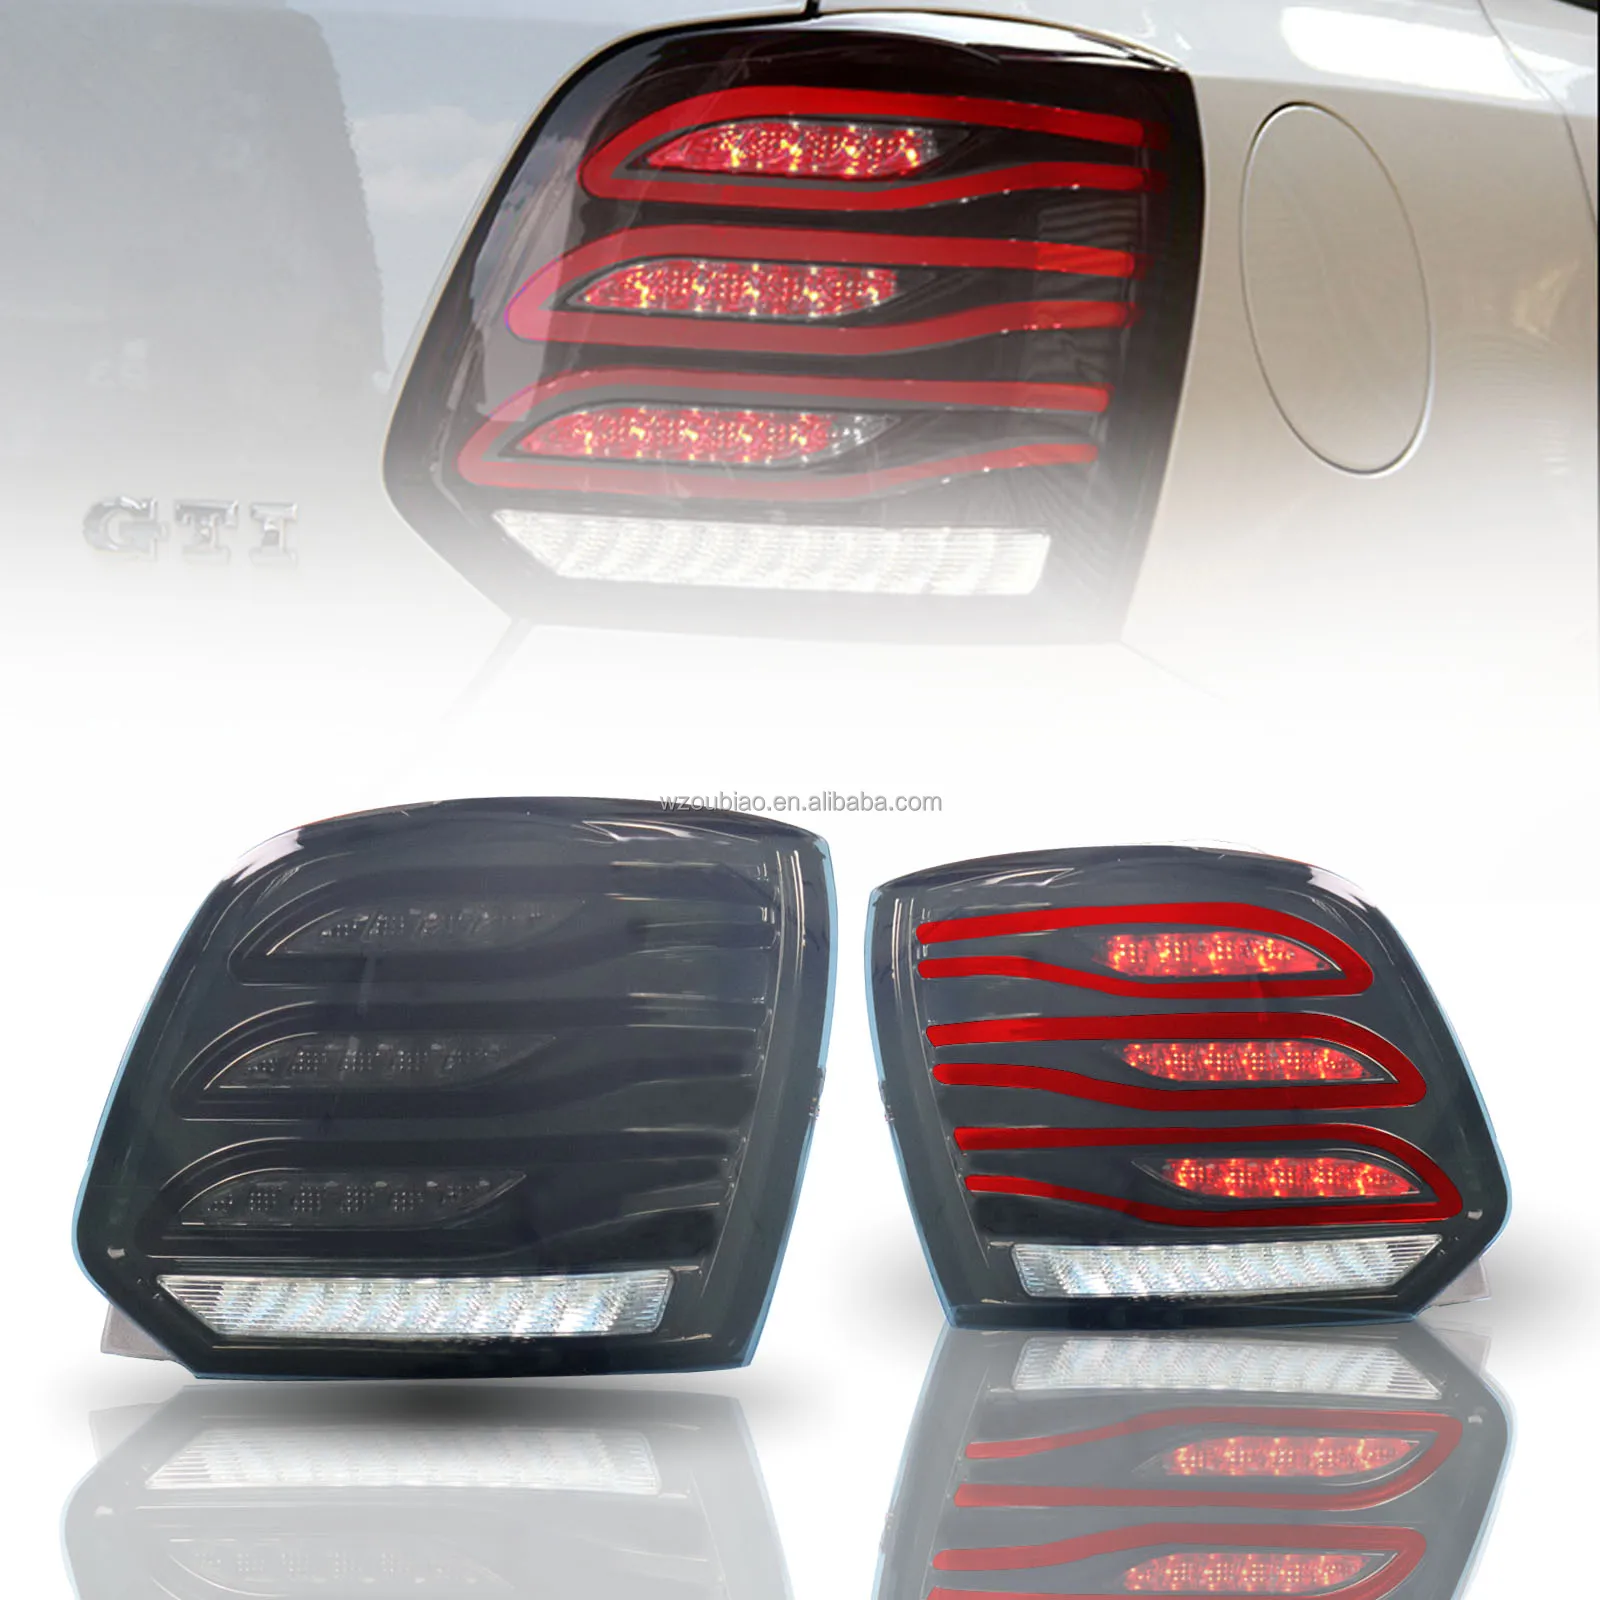 2021 Hot Sale Car Tail Lamp For Vw Polo Taillights Led Turn Signal Brake Reverse Lights